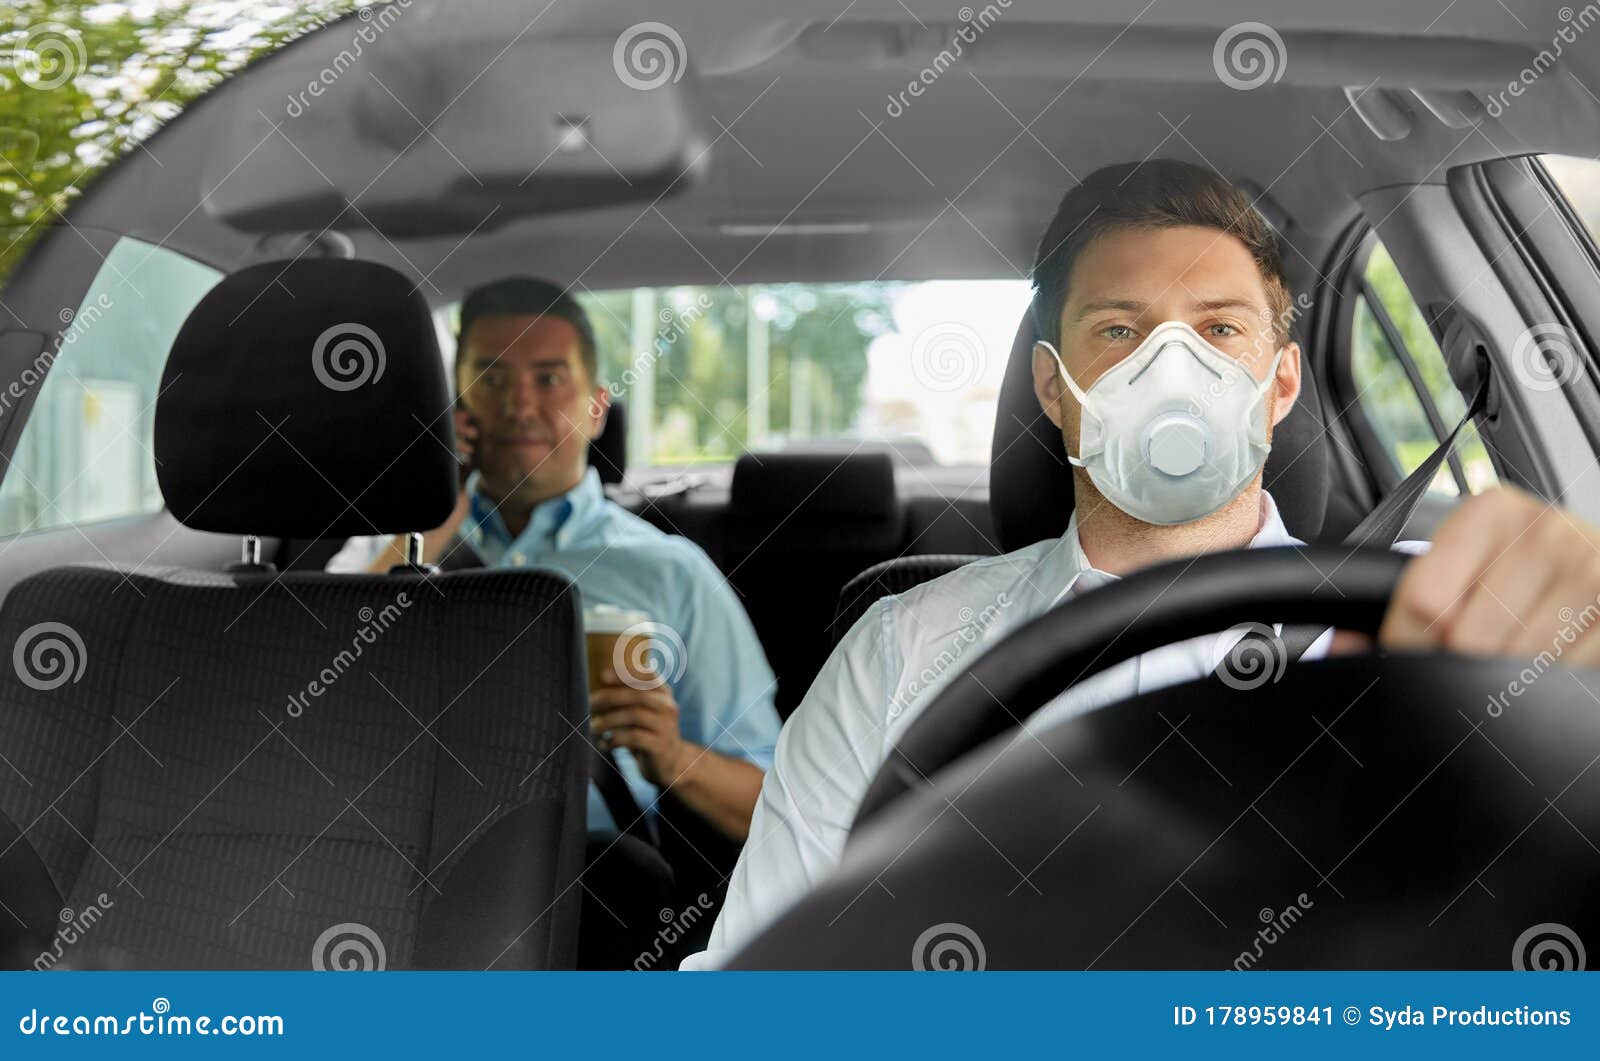 Taxi Driver In Mask Driving Car With Passenger Stock Image Image Of